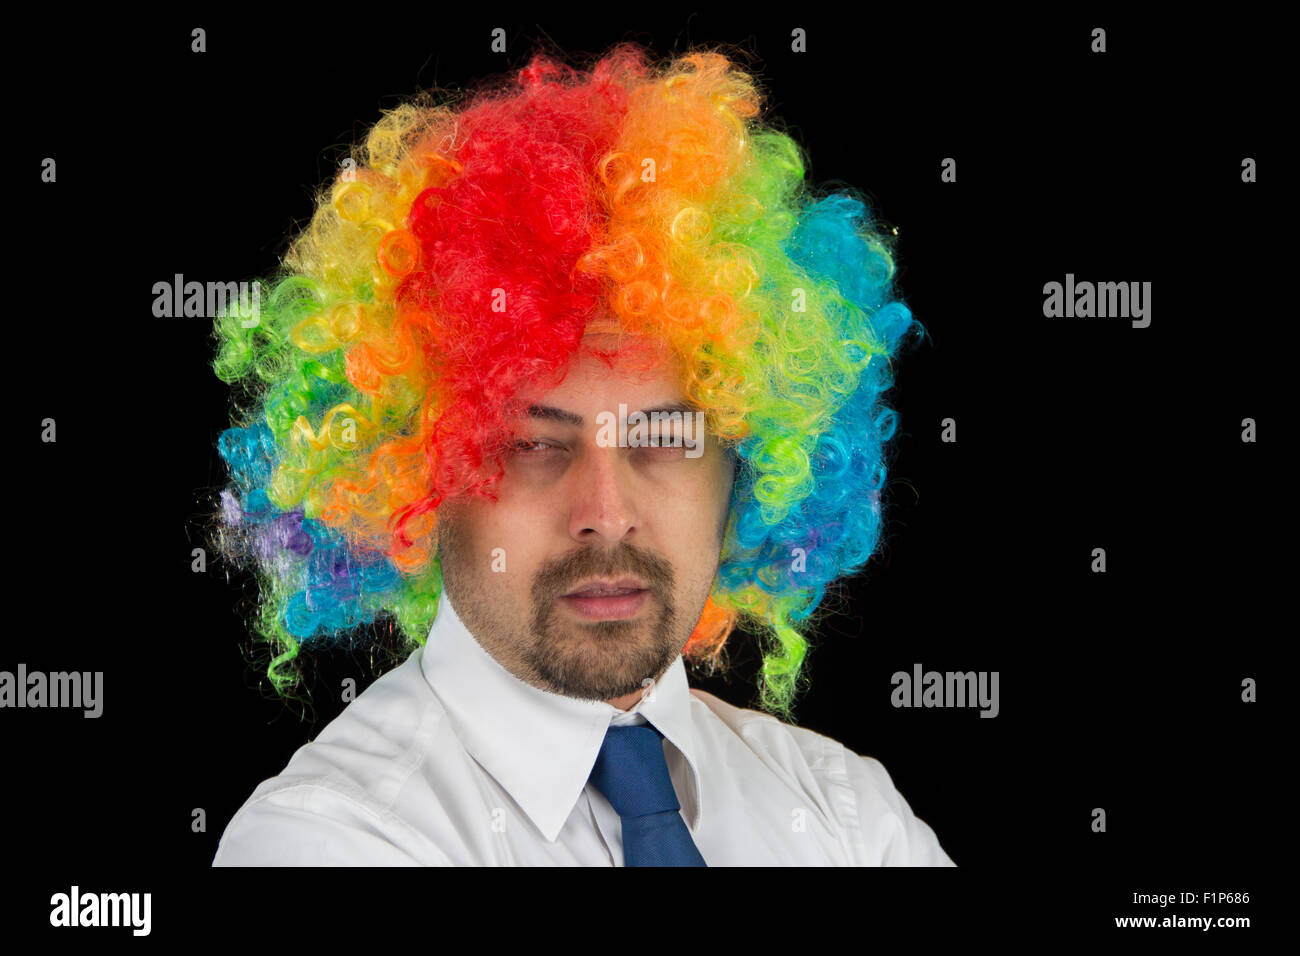 business man wearing colorful wig looking bored Stock Photo